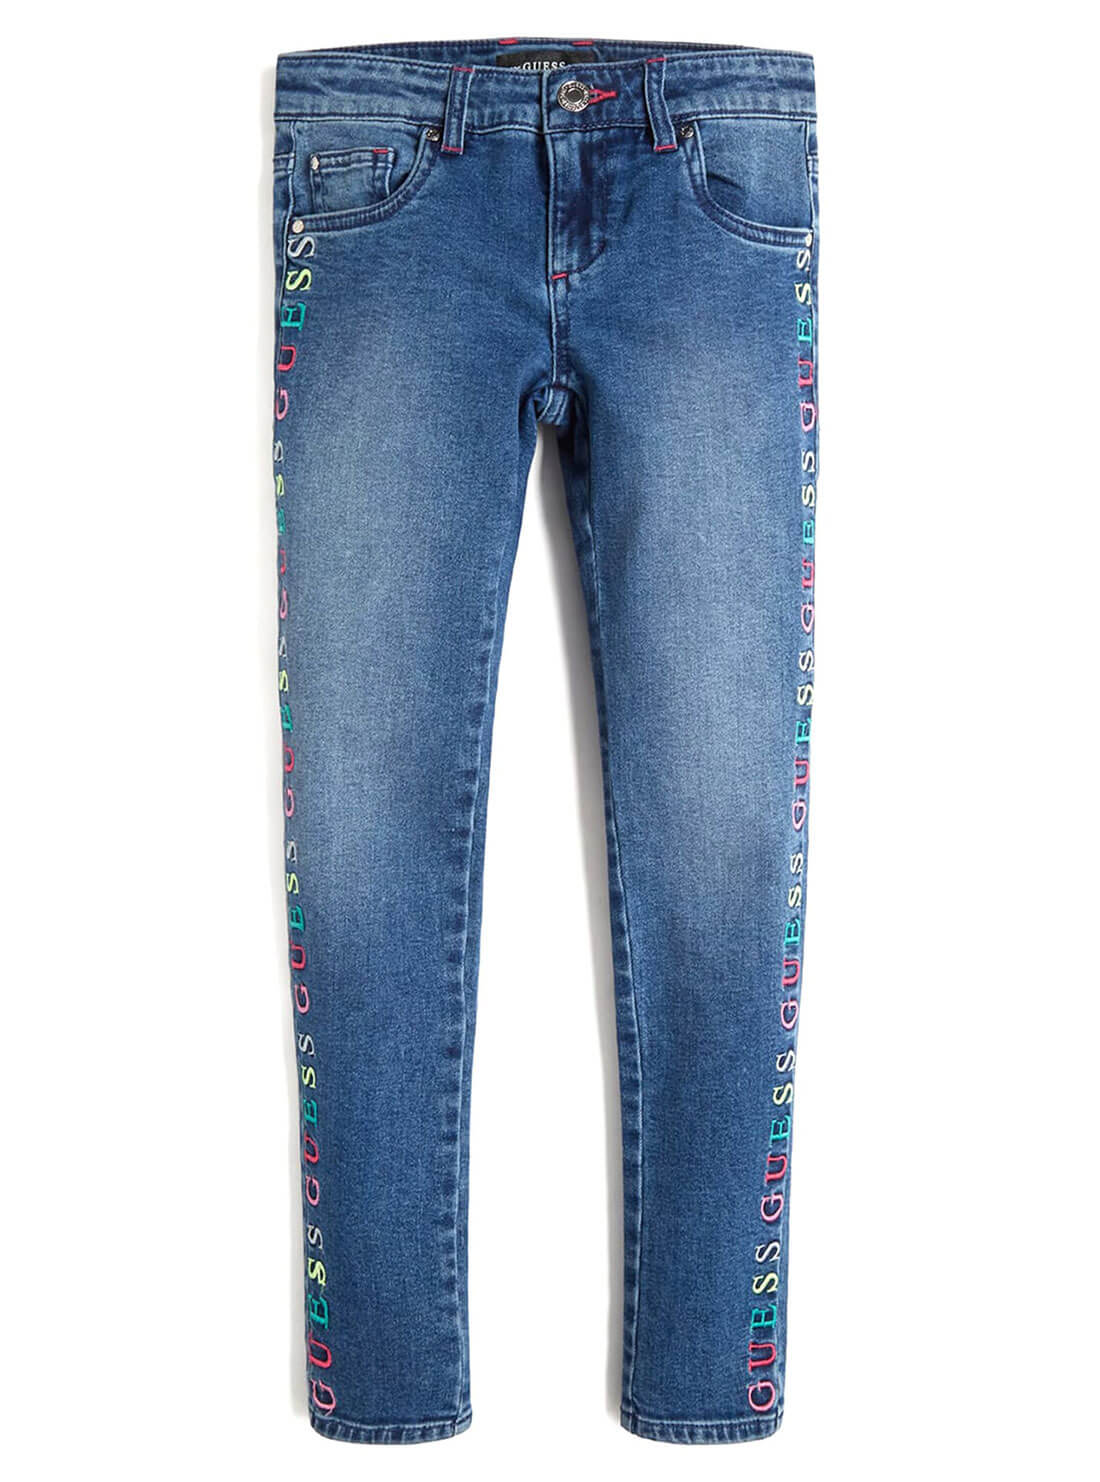 GUESS Big Girls Embroidered Skinny Denim Jeans In Glittering Wash (7-16) J1YA26D4G60 Front View